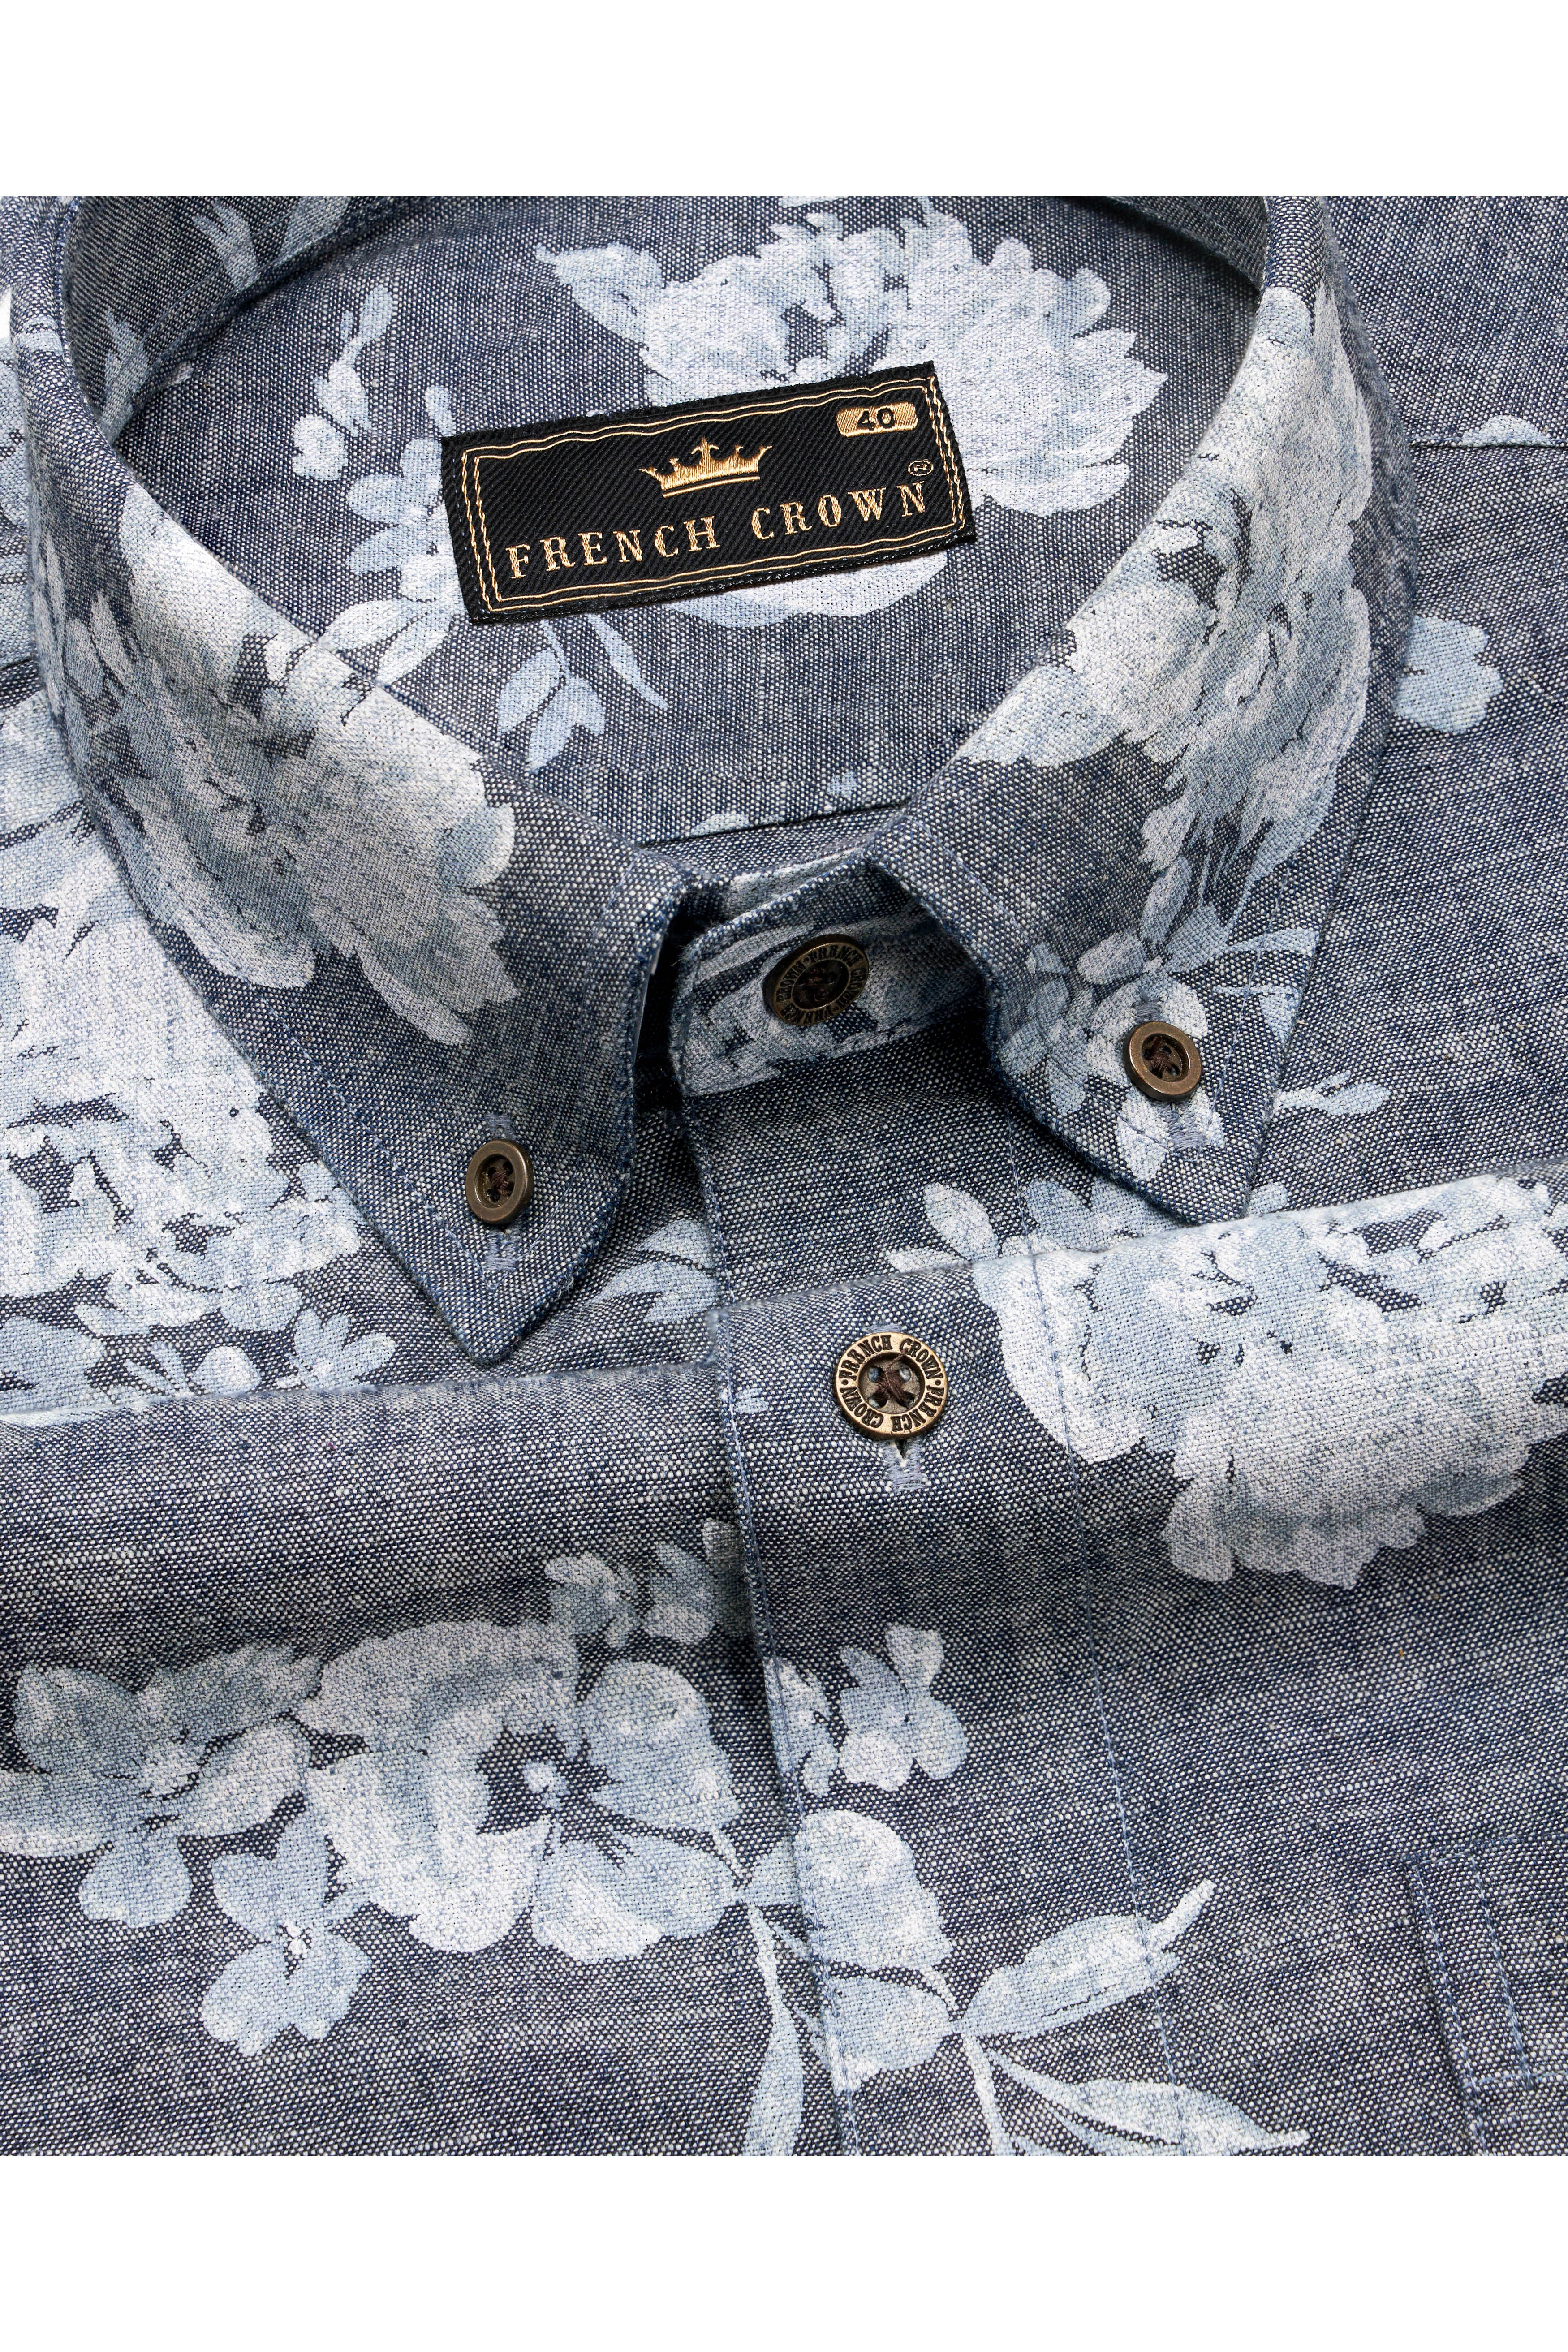 Nevada with Languid Gray Floral Textured Denim Shirt 10146-BD-38, 10146-BD-H-38, 10146-BD-39, 10146-BD-H-39, 10146-BD-40, 10146-BD-H-40, 10146-BD-42, 10146-BD-H-42, 10146-BD-44, 10146-BD-H-44, 10146-BD-46, 10146-BD-H-46, 10146-BD-48, 10146-BD-H-48, 10146-BD-50, 10146-BD-H-50, 10146-BD-52, 10146-BD-H-52